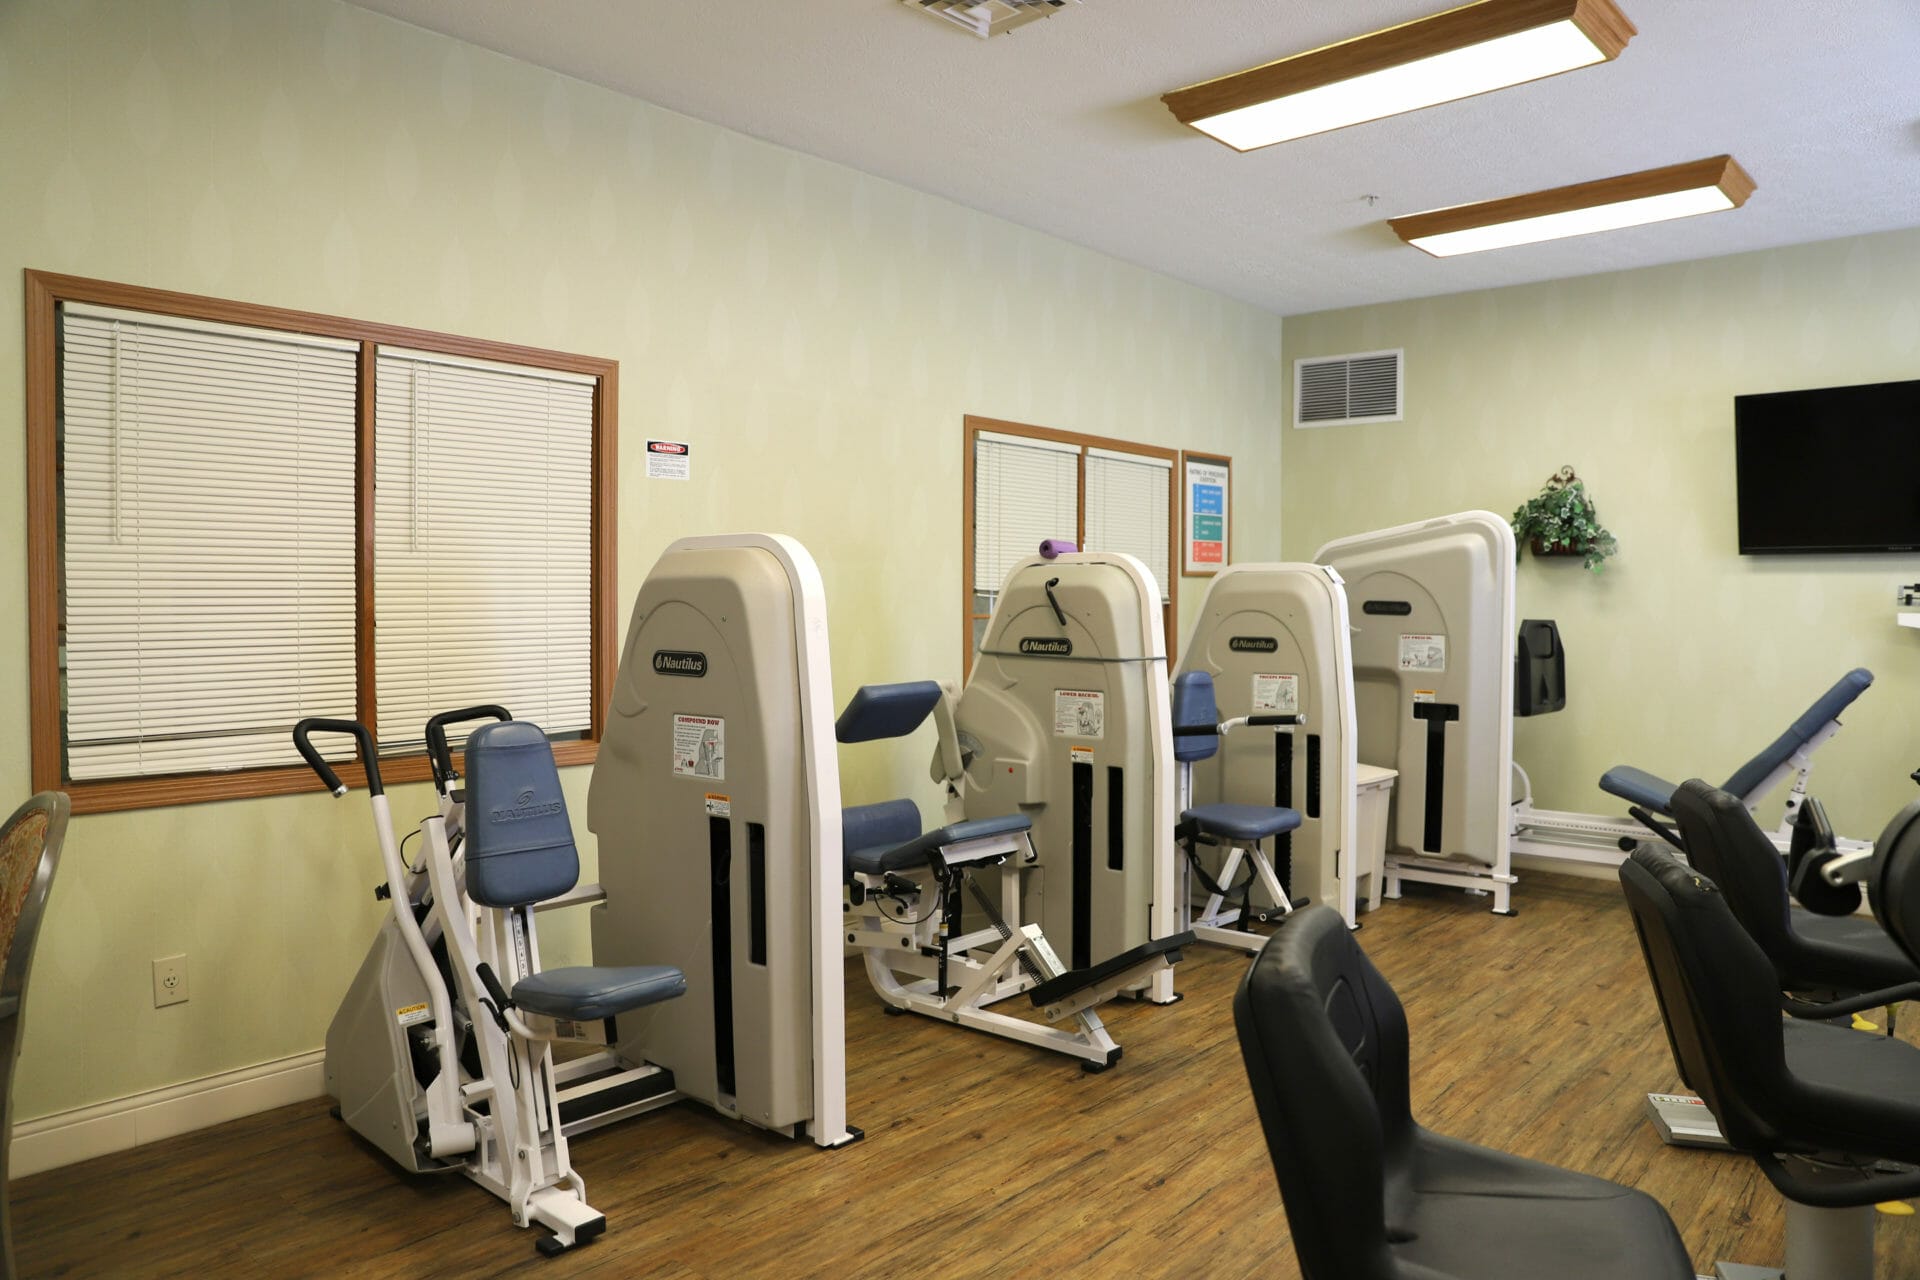 <span  class="uc_style_uc_tiles_grid_image_elementor_uc_items_attribute_title" style="color:#000000;">Meadow Lakes New Energy Wellness Room with exercise equipment. </span>